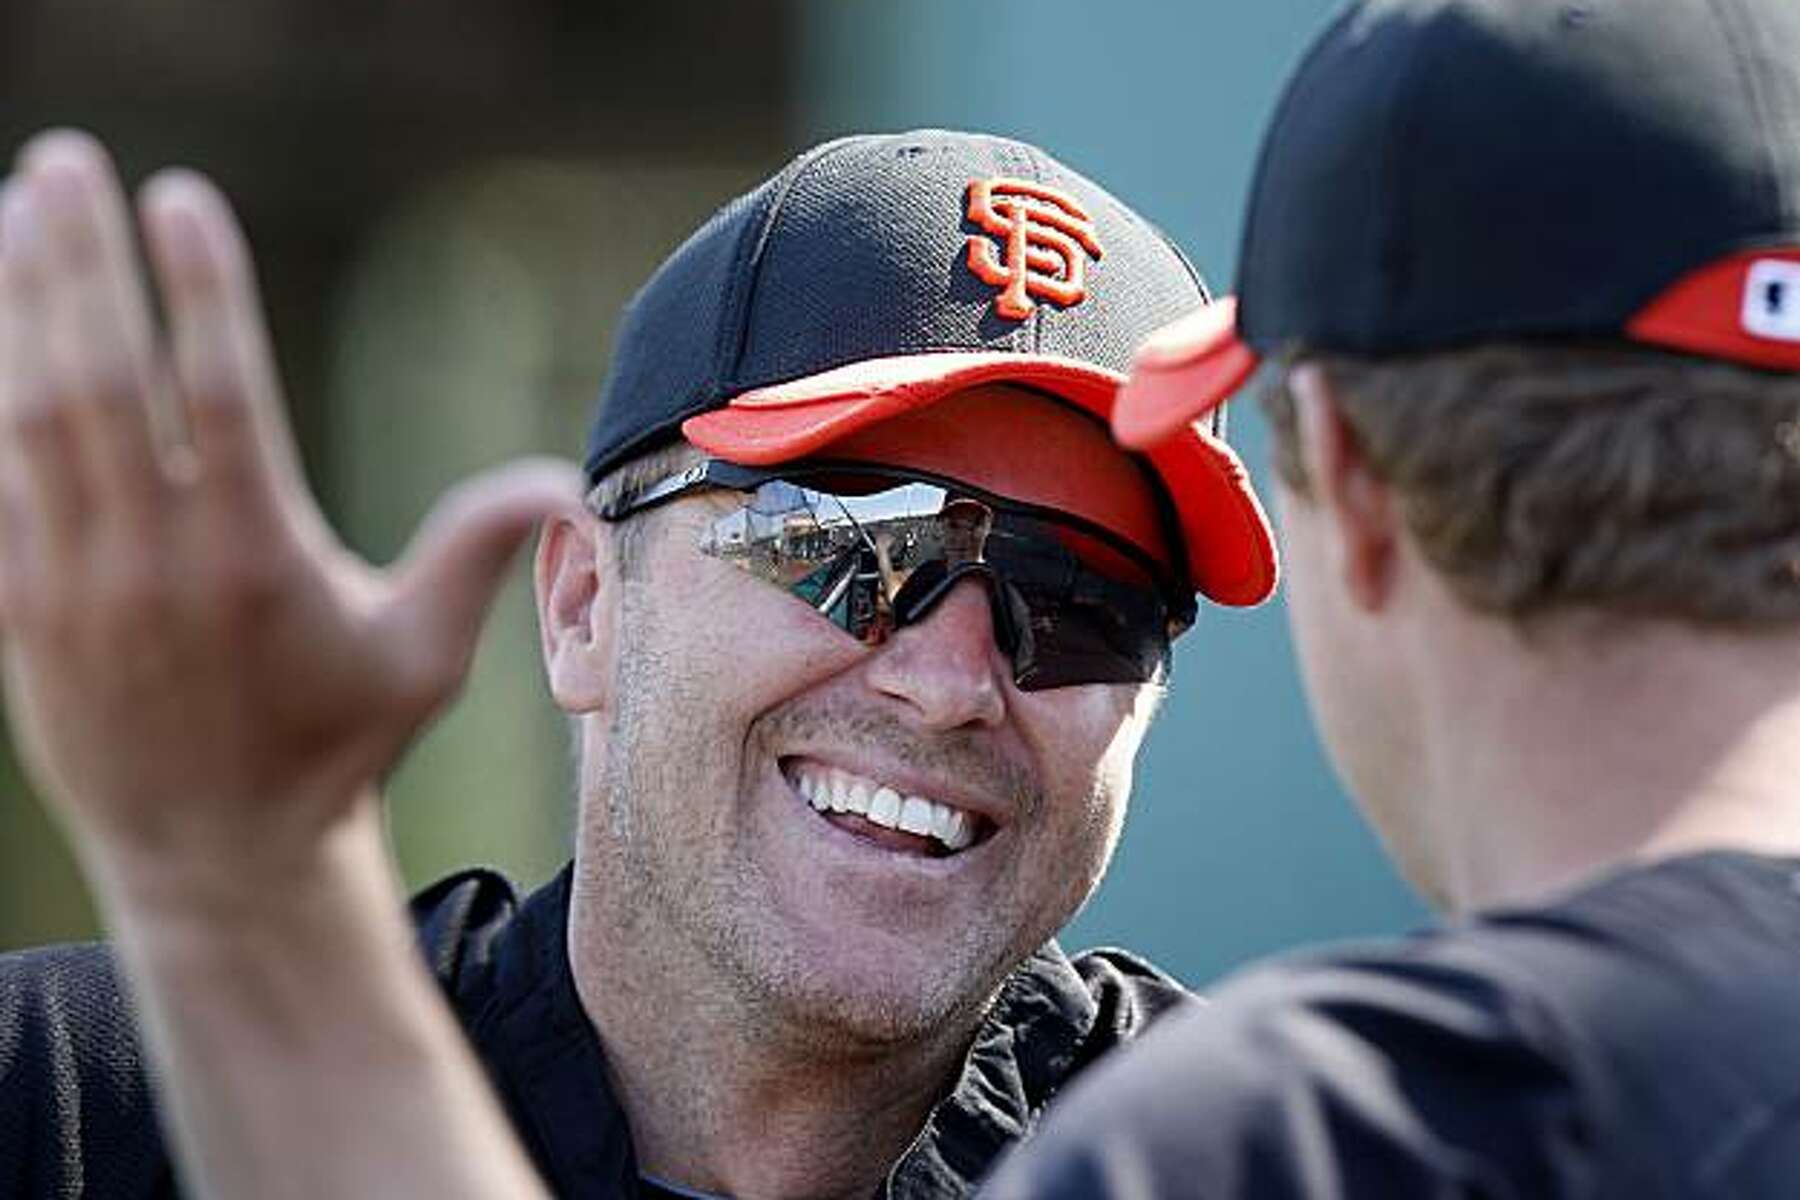 Giants coach Ron Wotus to reunite with Bruce Bochy